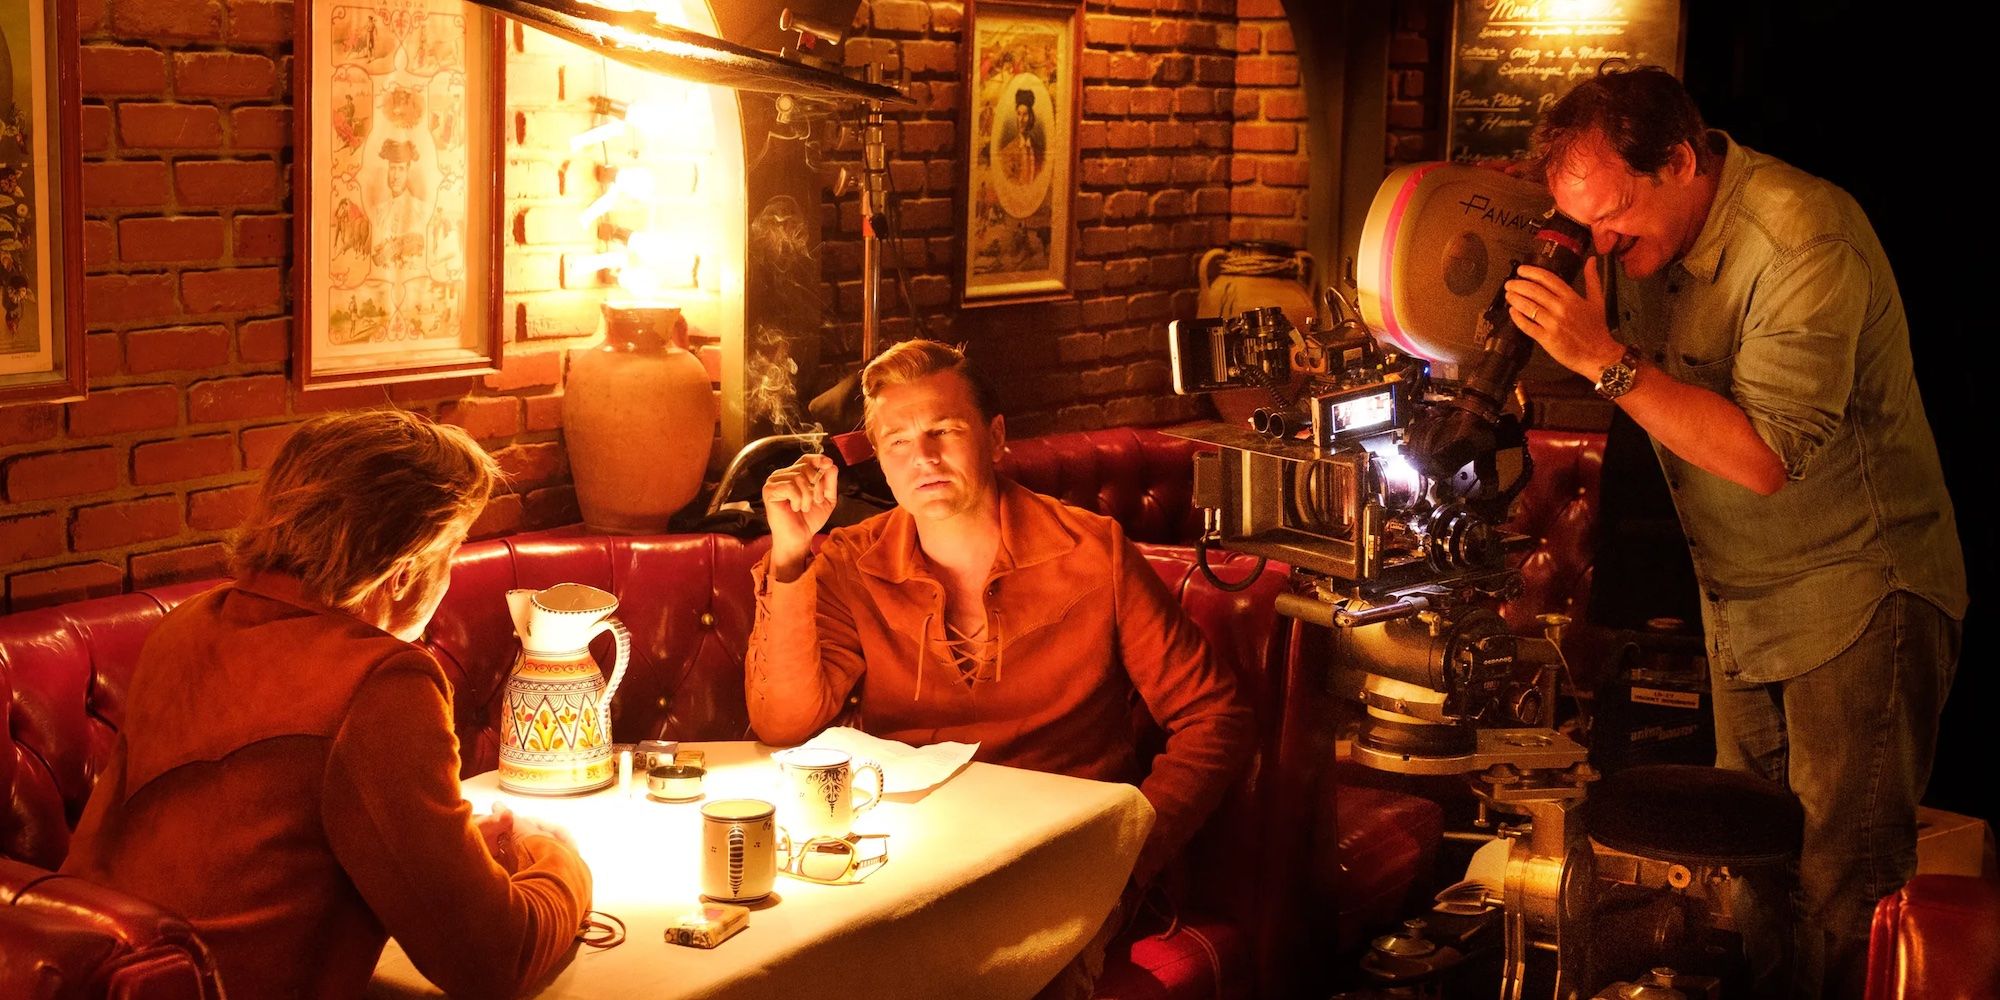 Quentin Tarantino shoots Leonardo DiCaprio and Brad Pitt in Once Upon a Time in Hollywood